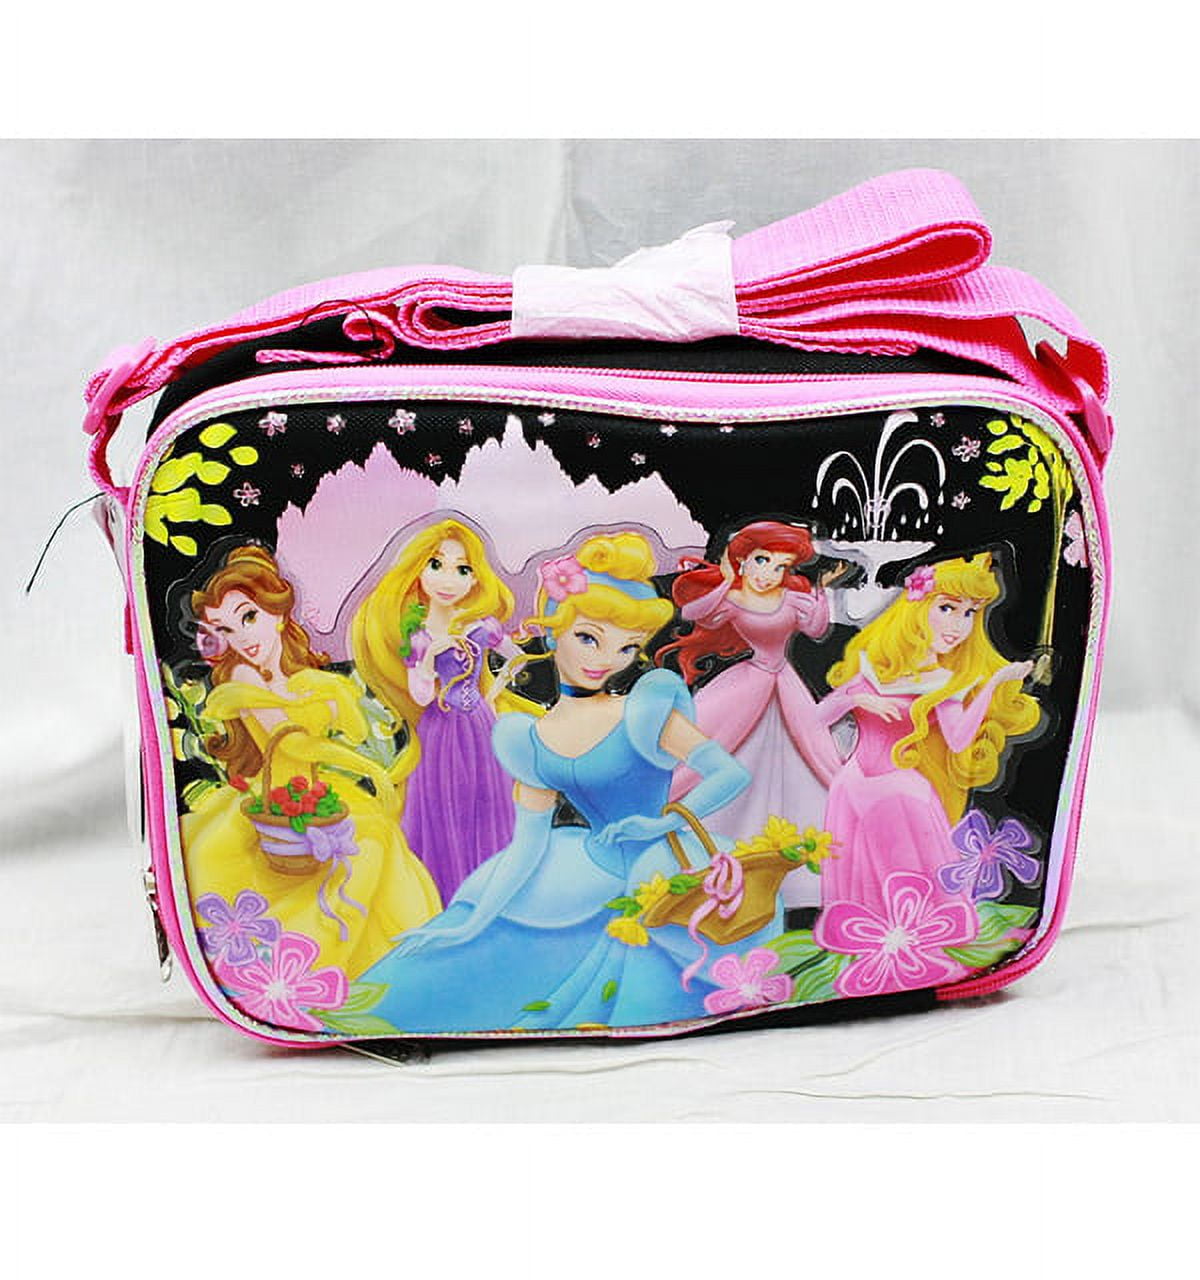 Disney - Princess Lunch Bag for Sale in New York, NY - OfferUp